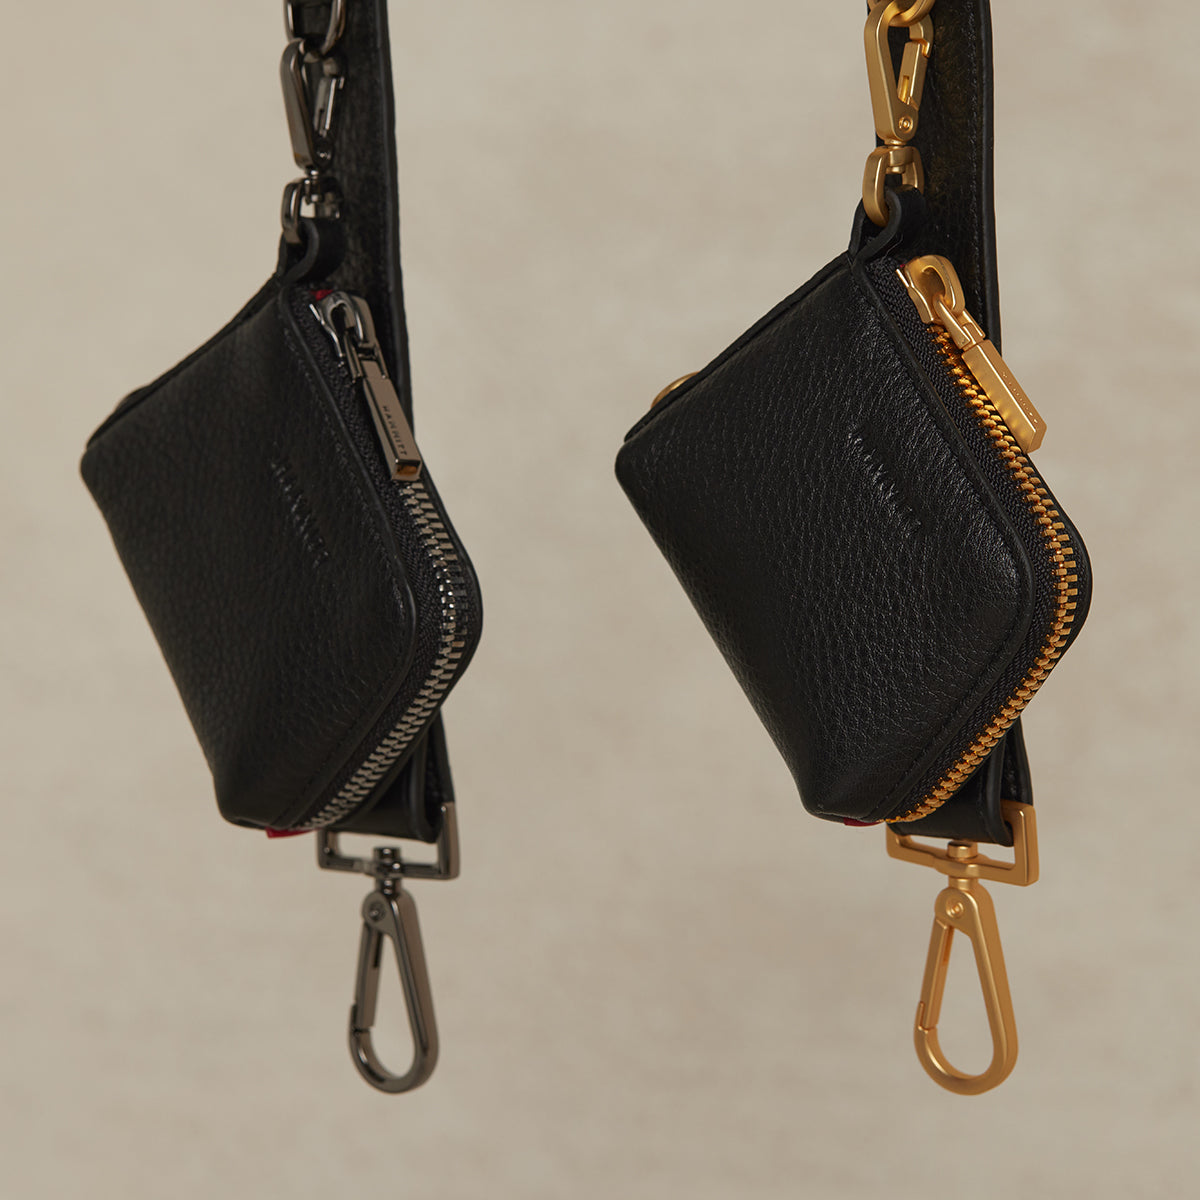 Whoever came up with strap extenders is a genius! : r/handbags